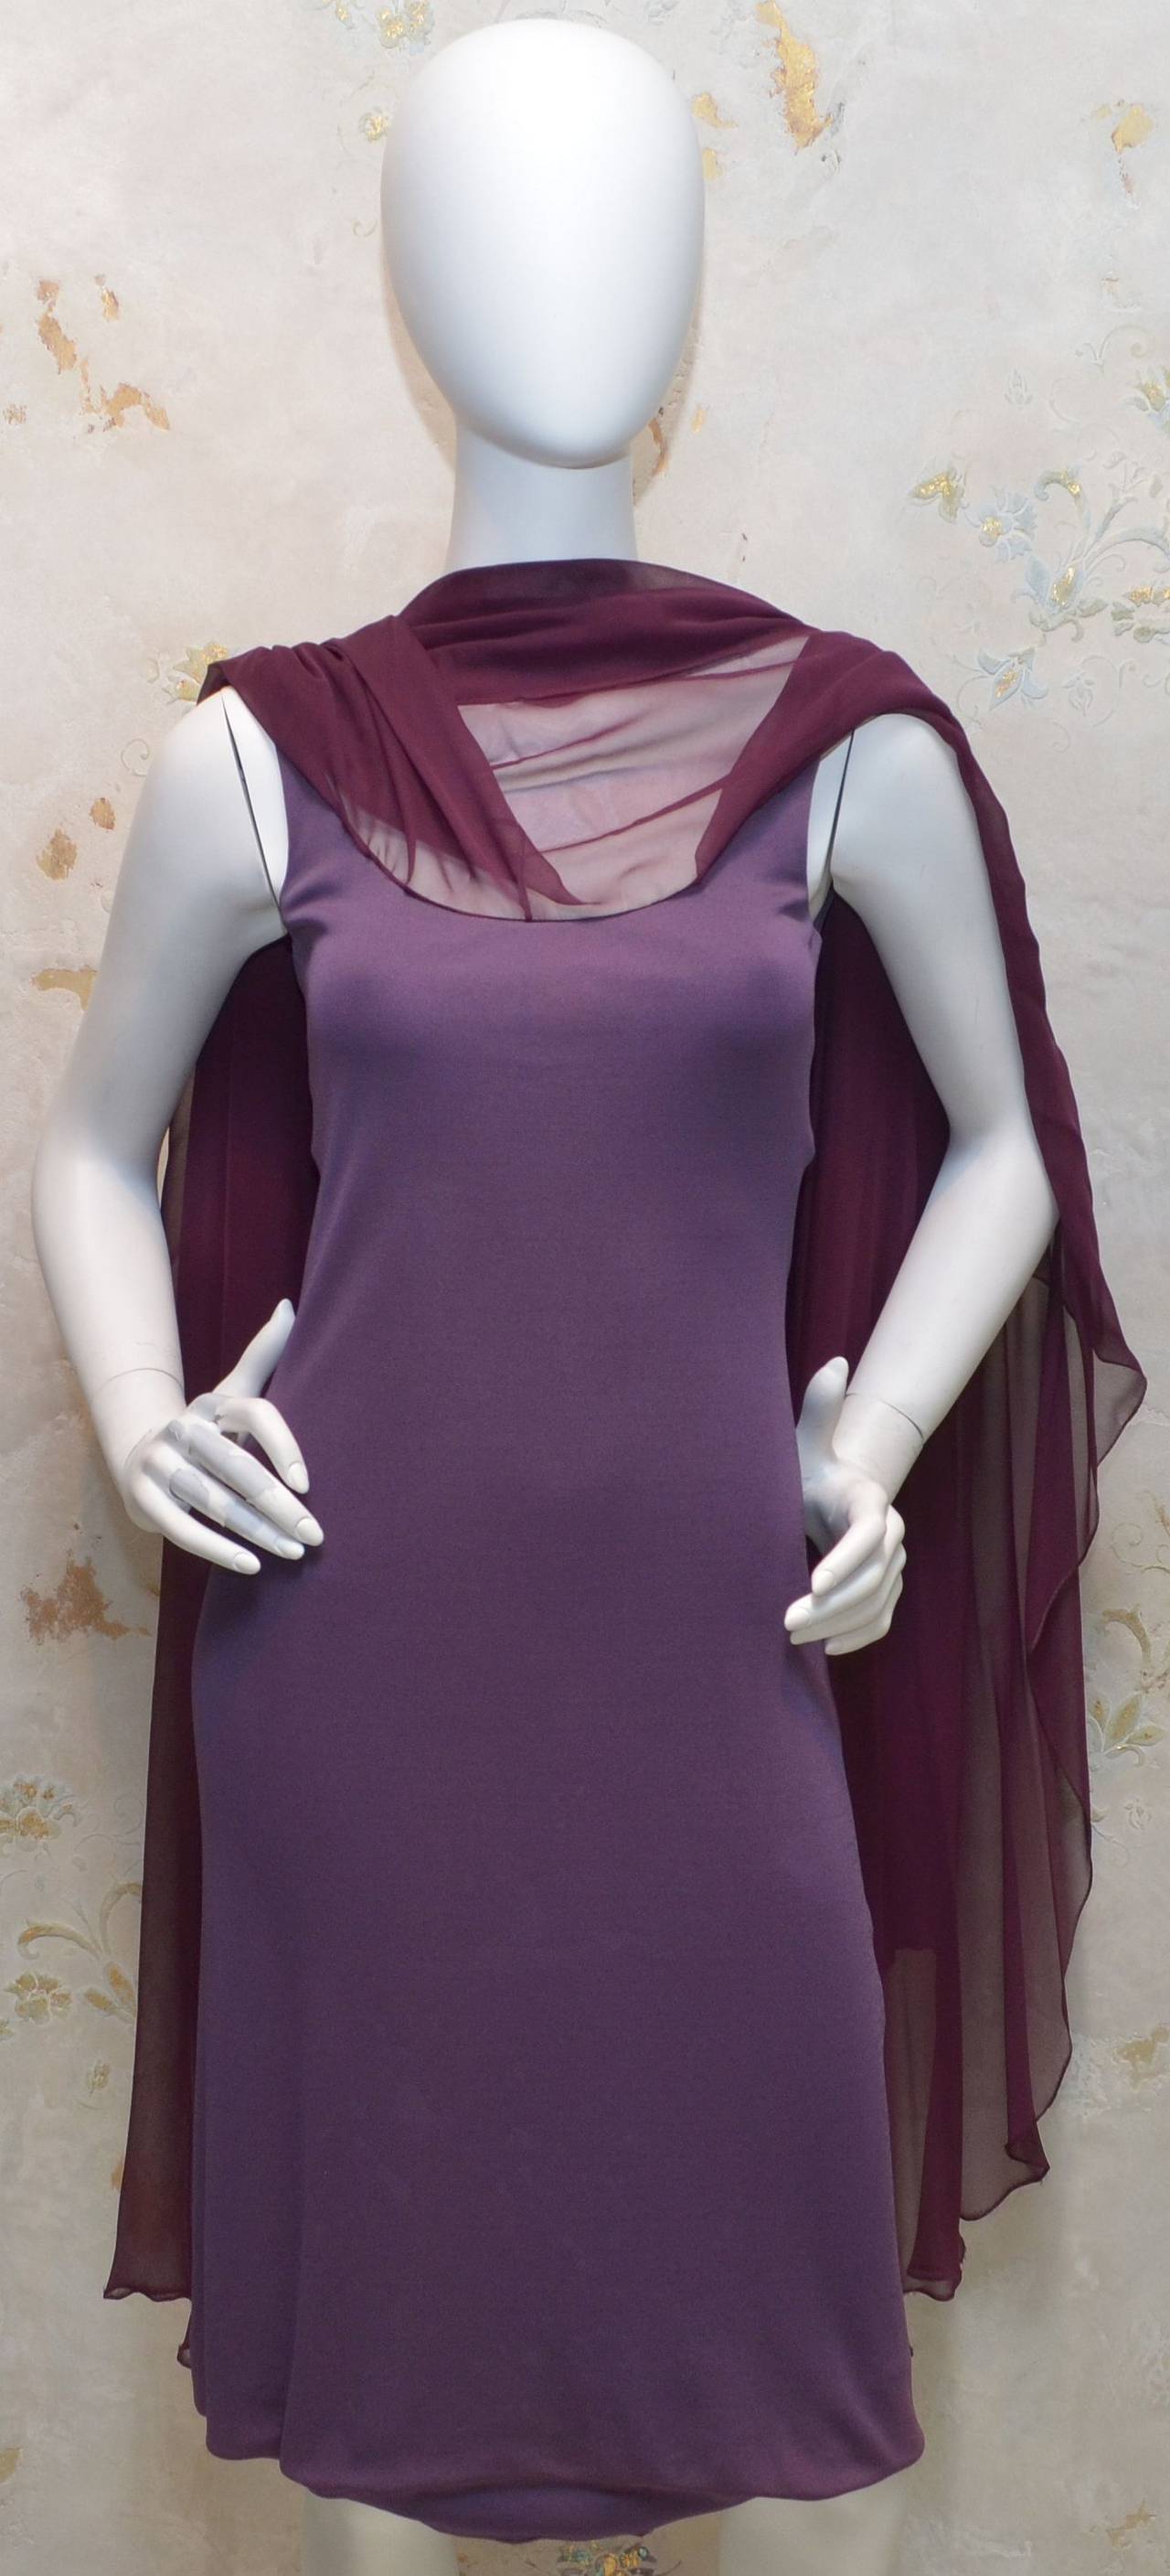 Vintage Halston dress features a deep maroon-colored chiffon layer and a jersey slip. Minor wears but in GREAT vintage condition!

Measurements:
Bust - 28''
Waist - 25''
Hips - 33''
Length - 43.5''